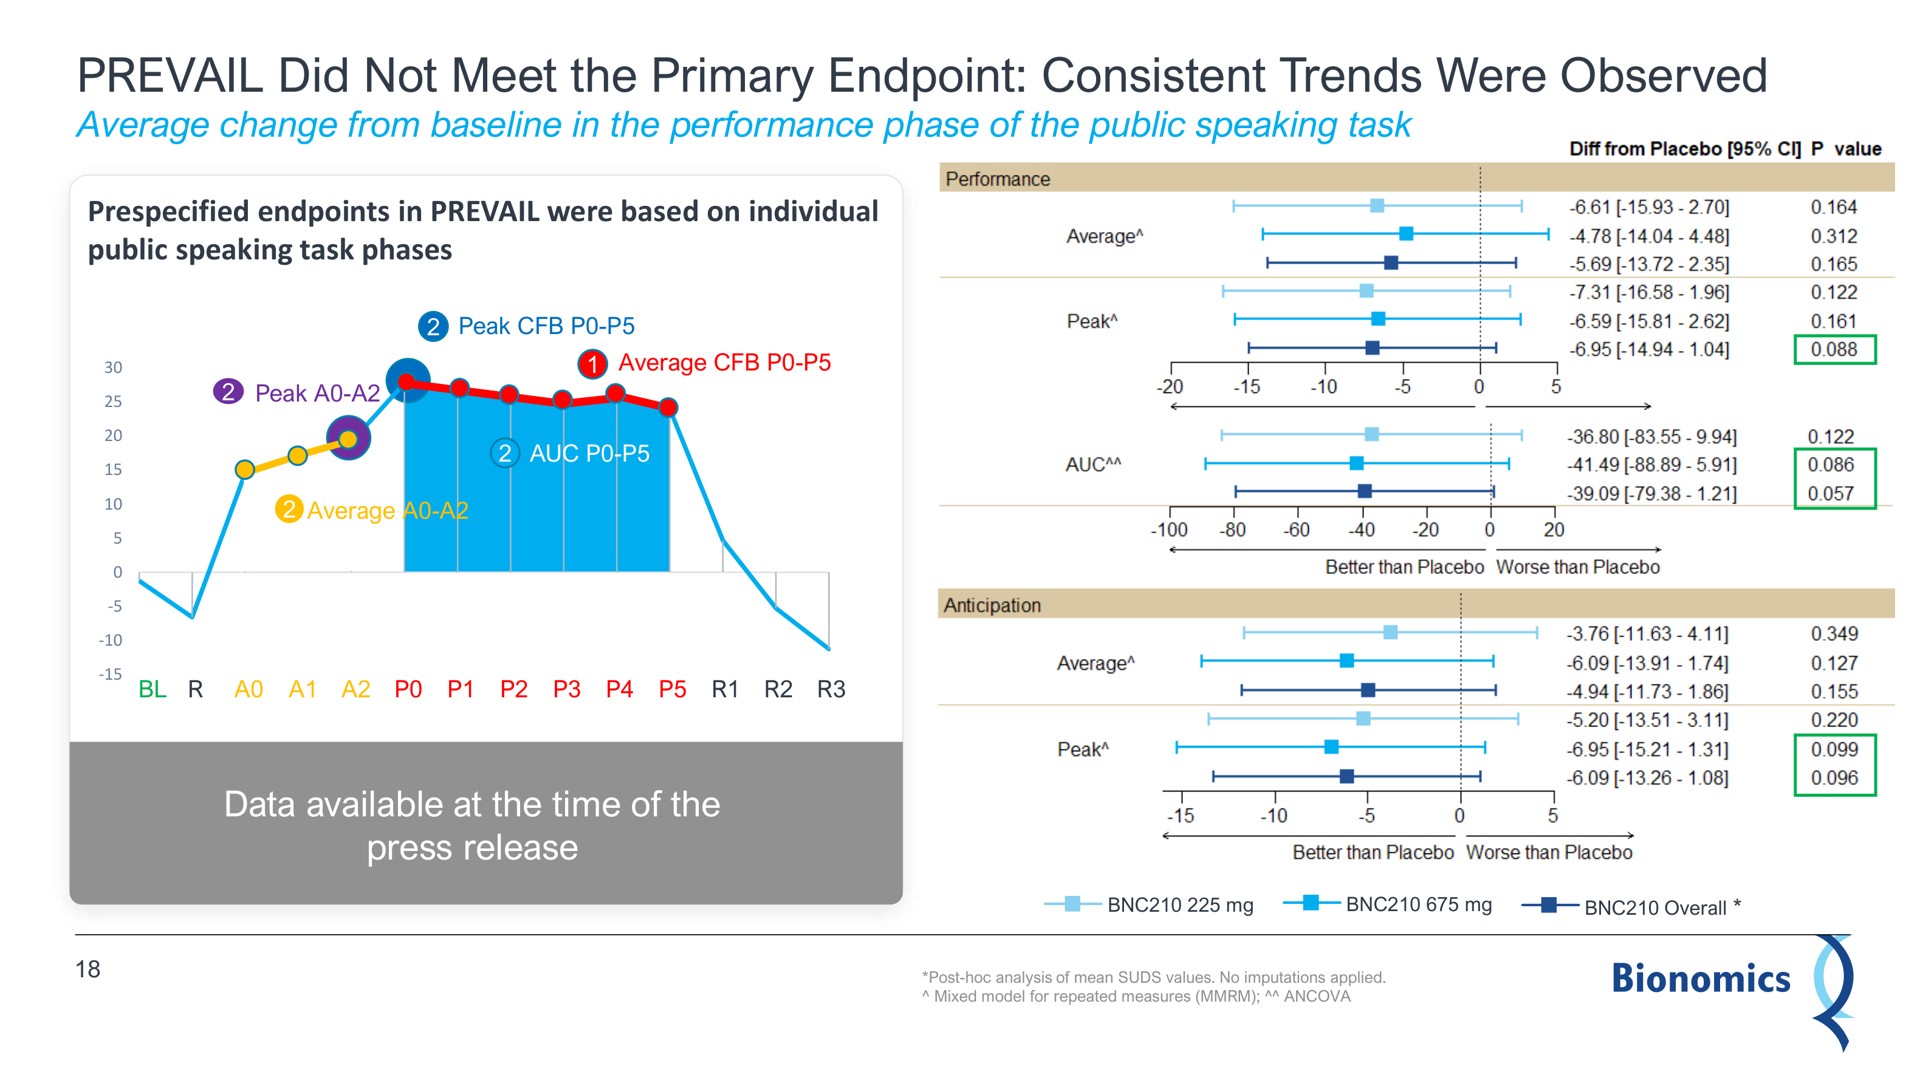 prevail did not meet the primary consistent trends were observed | Bionomics